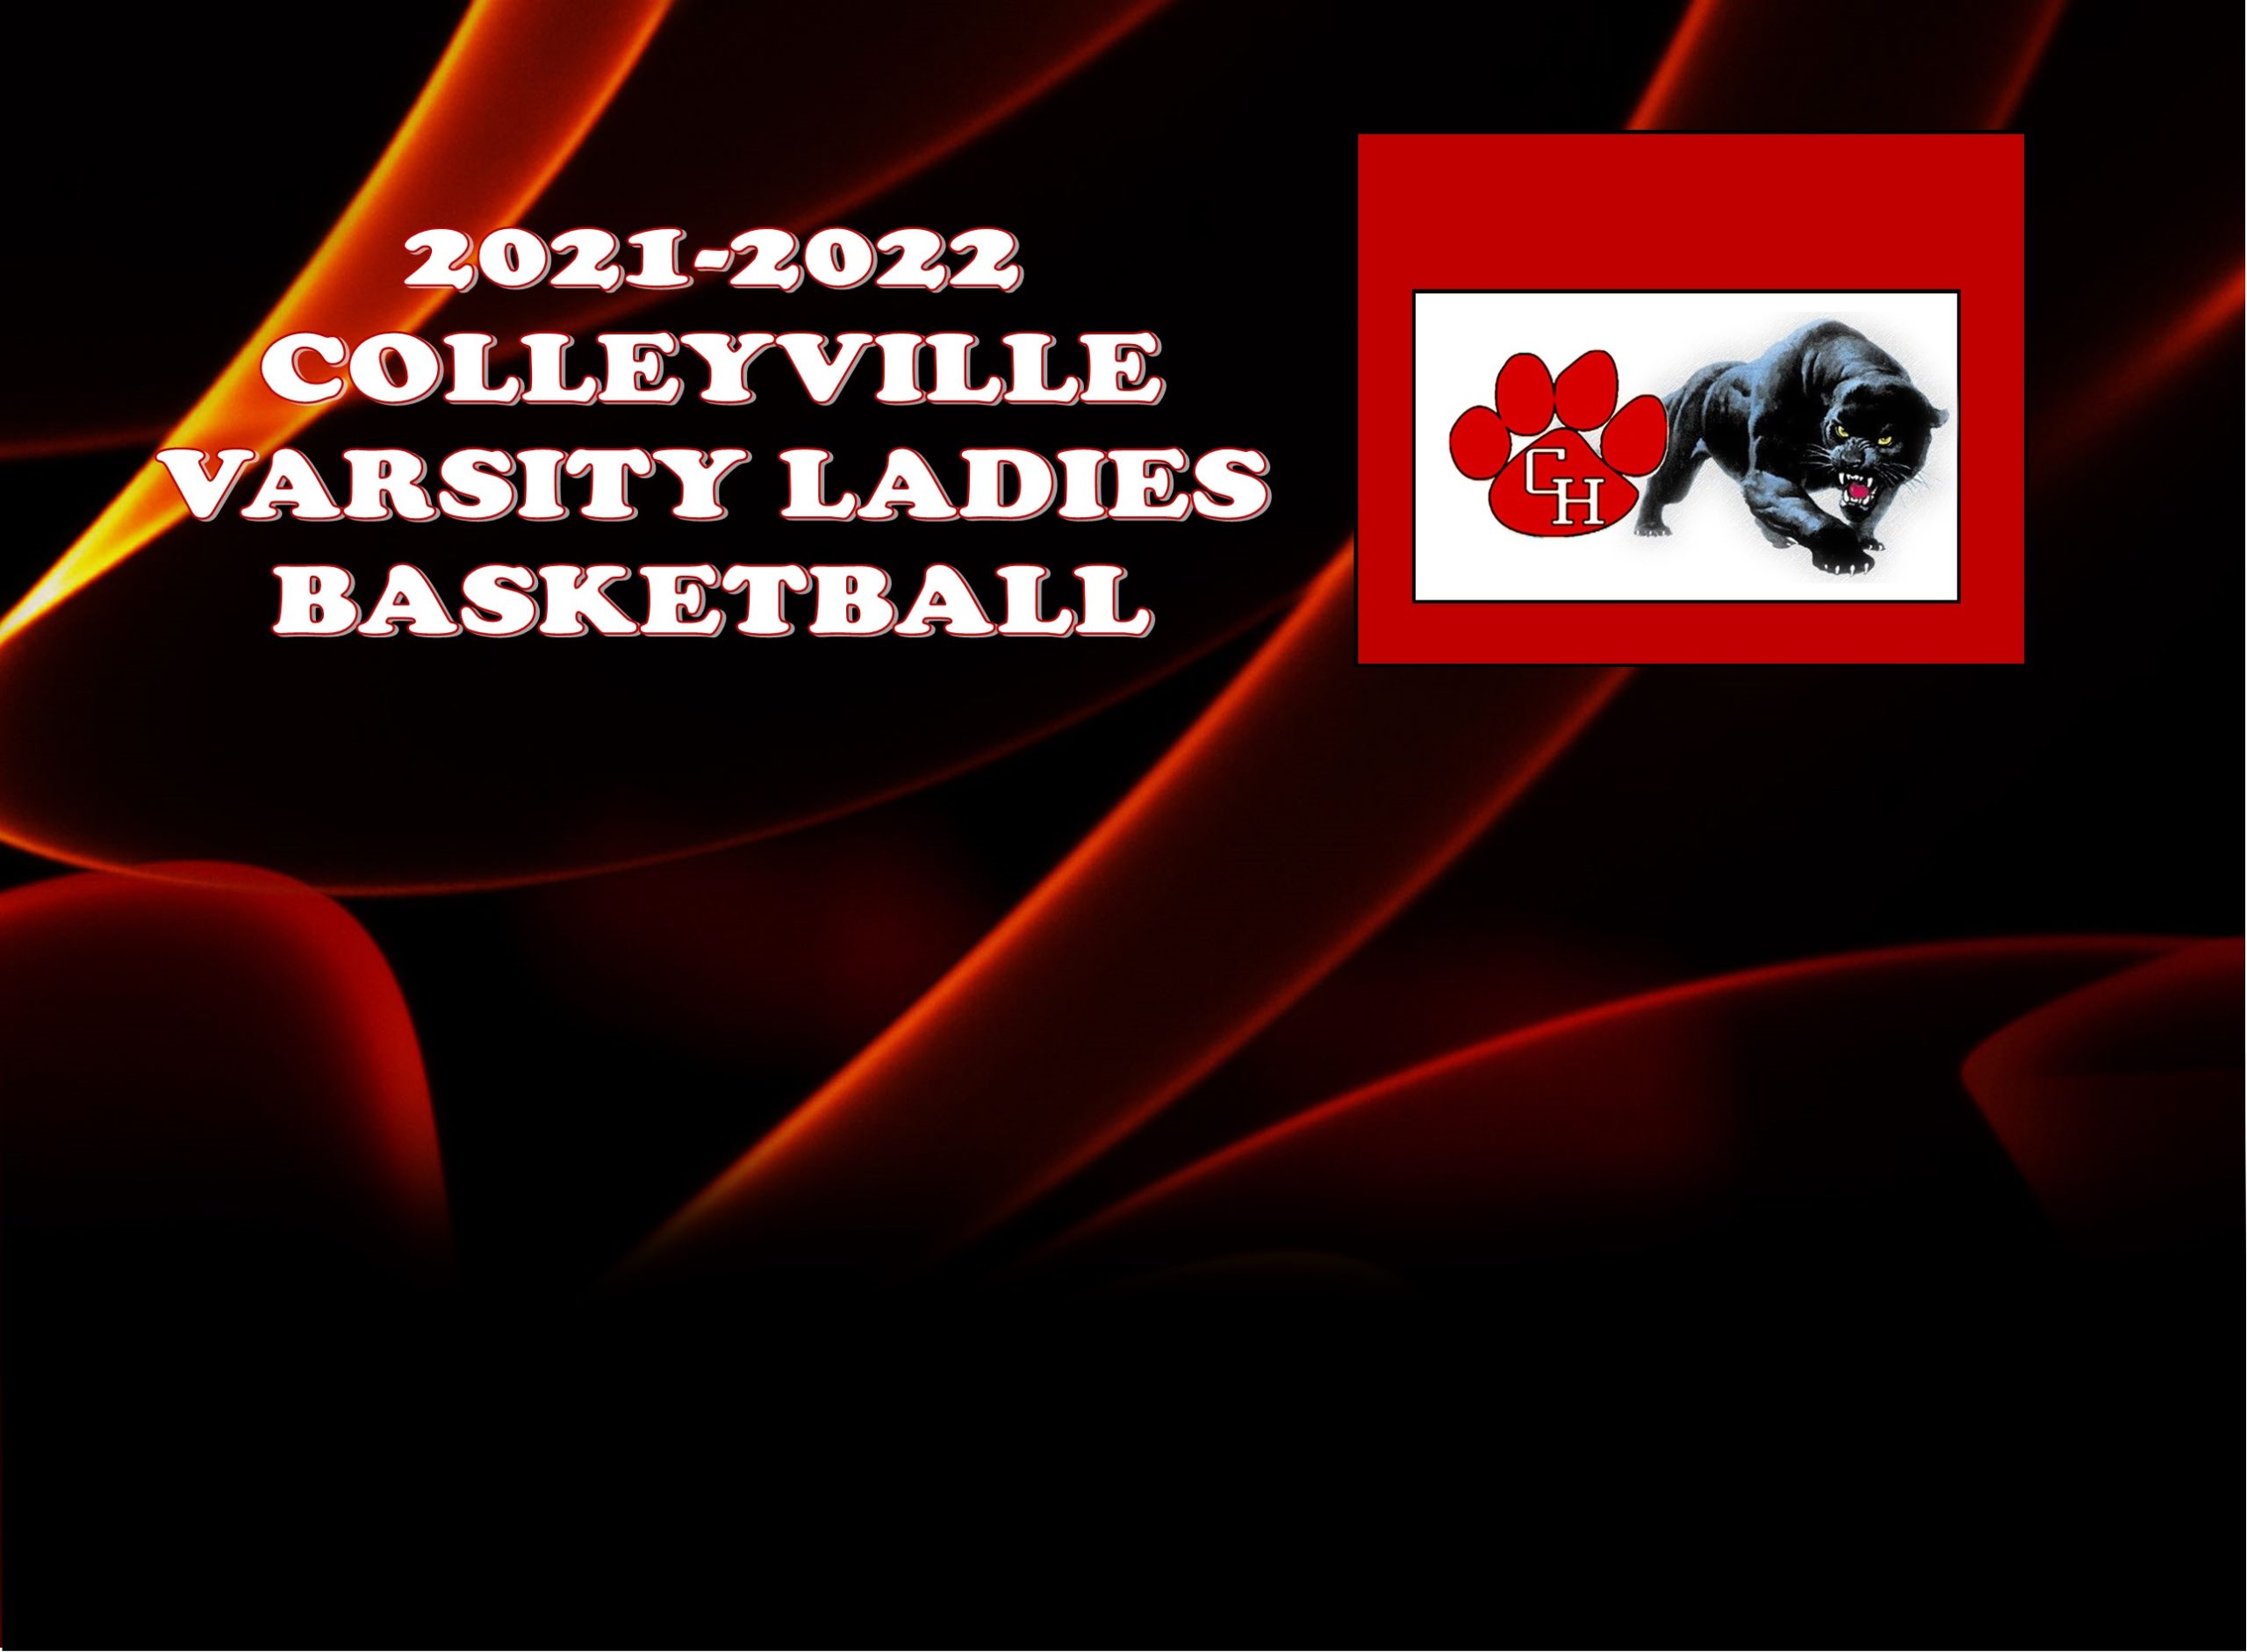 GCISD Basketball: Colleyville Lady Panthers Upset Southlake-Carroll Lady Dragons 47-43 in Overtime